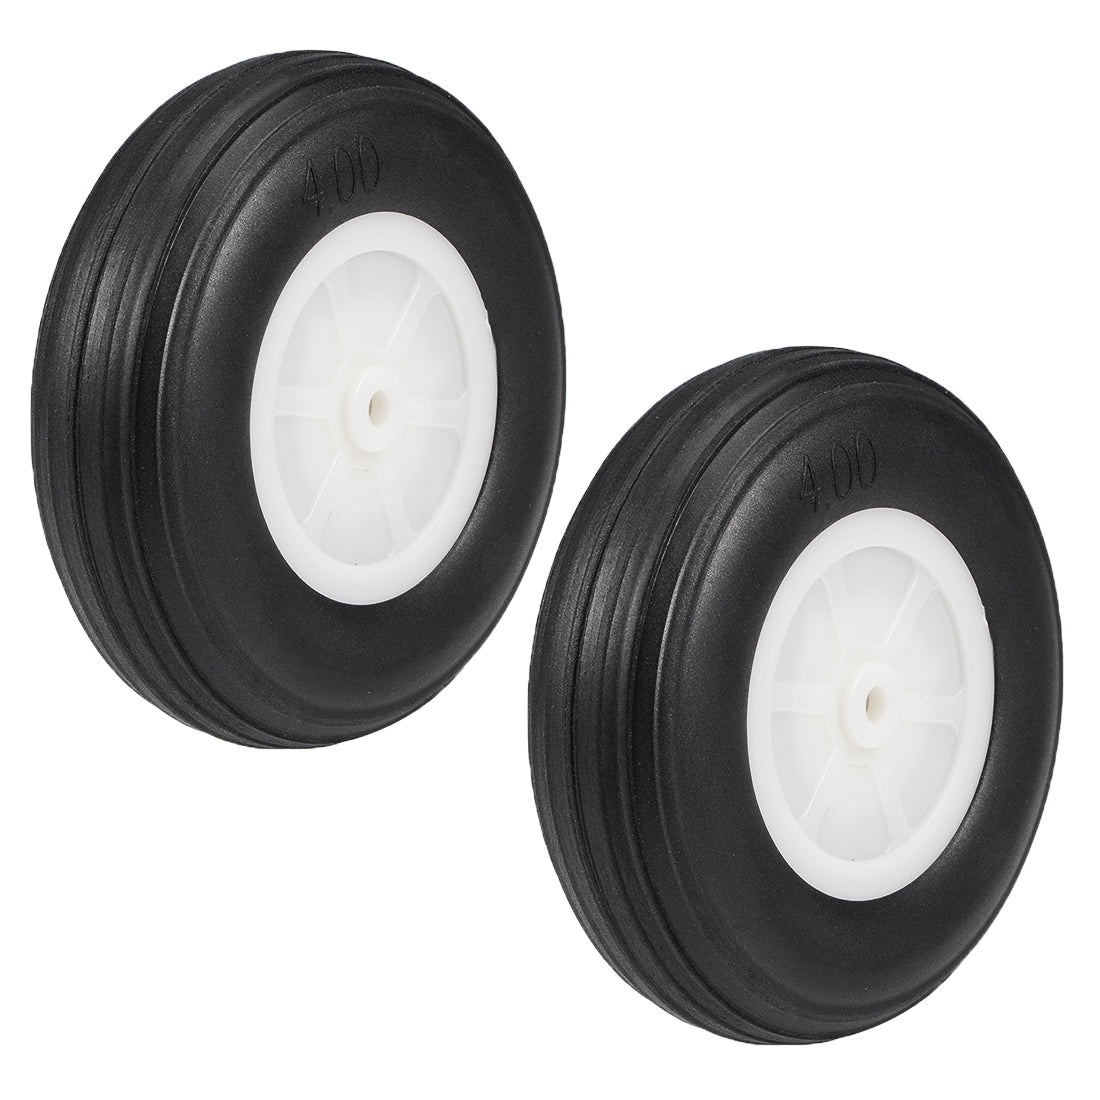 uxcell Uxcell Tire and Wheel Sets for RC Car Airplane,PU Sponge Tire with Plastic Hub,4" 2pcs